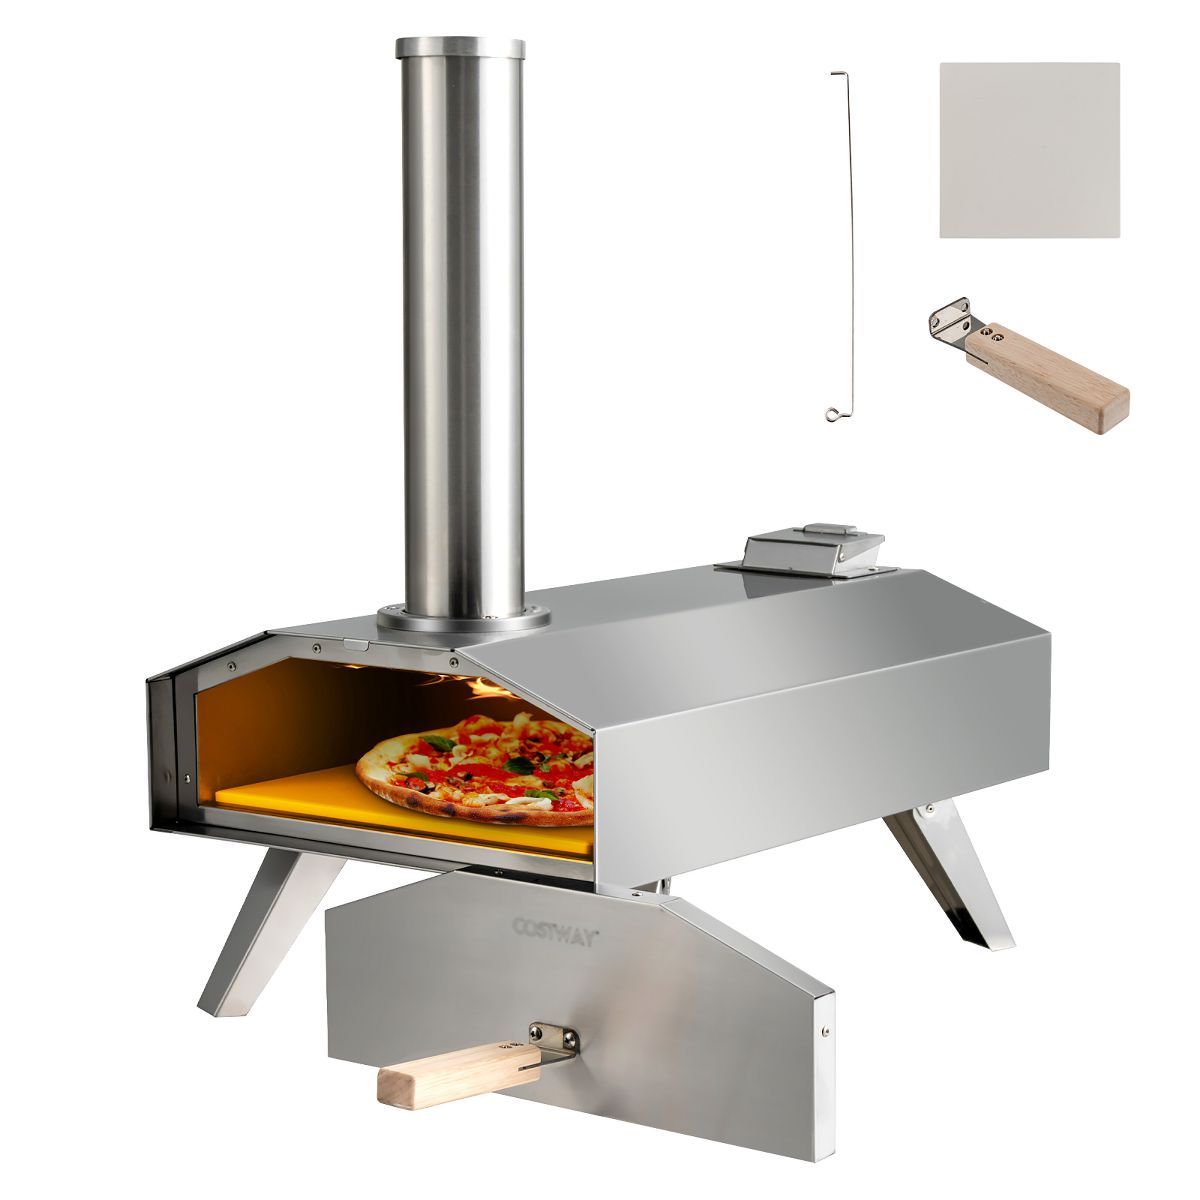 Costway Wood Pellet Pizza Oven Pizza Maker Portable Outdoor Pizza Stone w/ Foldable Leg | Target